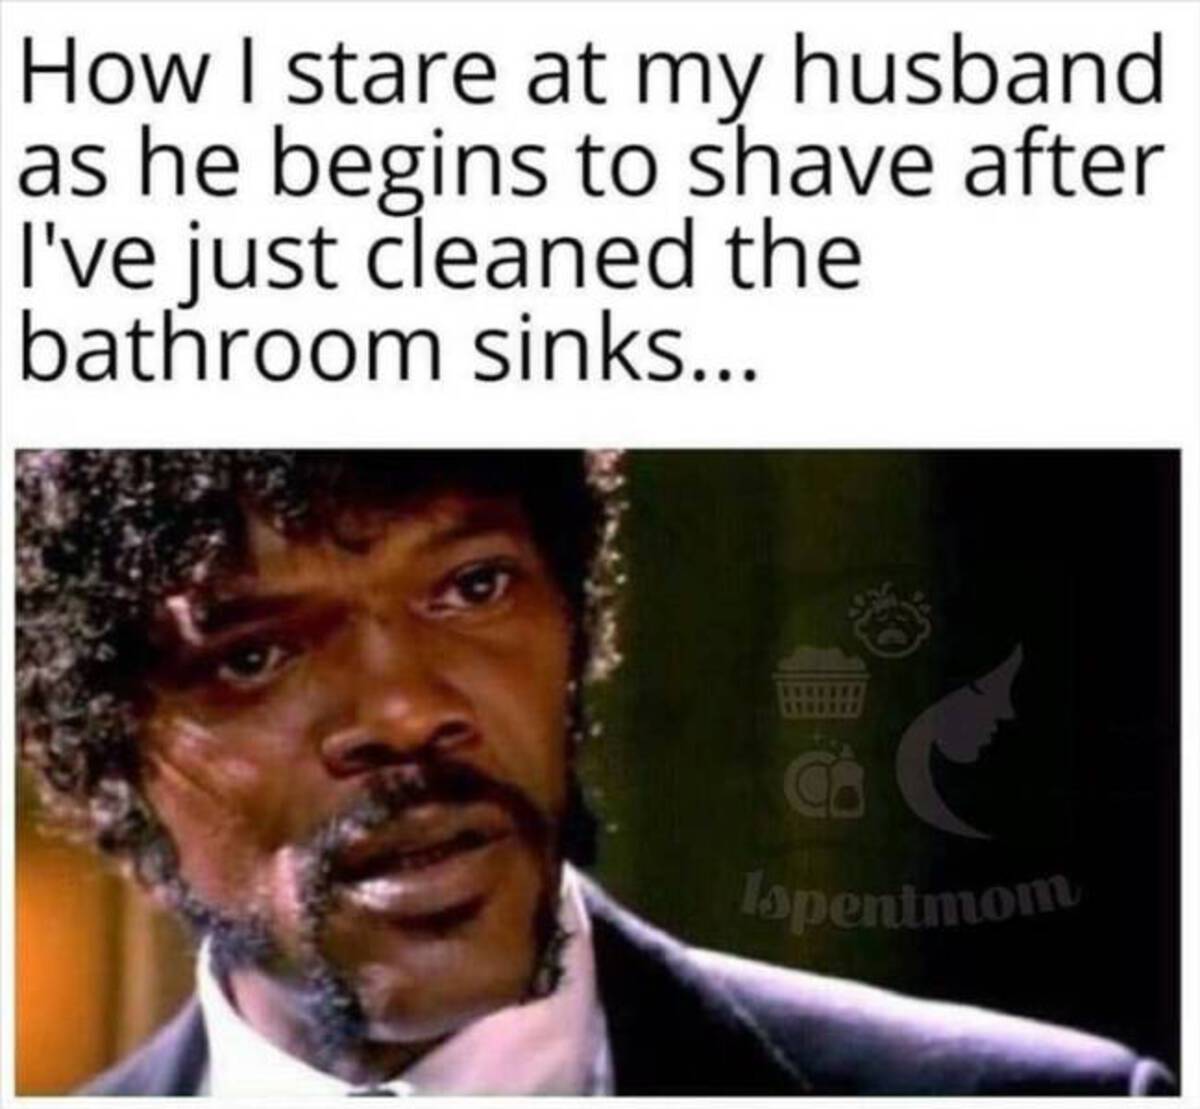 photo caption - How I stare at my husband as he begins to shave after I've just cleaned the bathroom sinks... Ispentmom